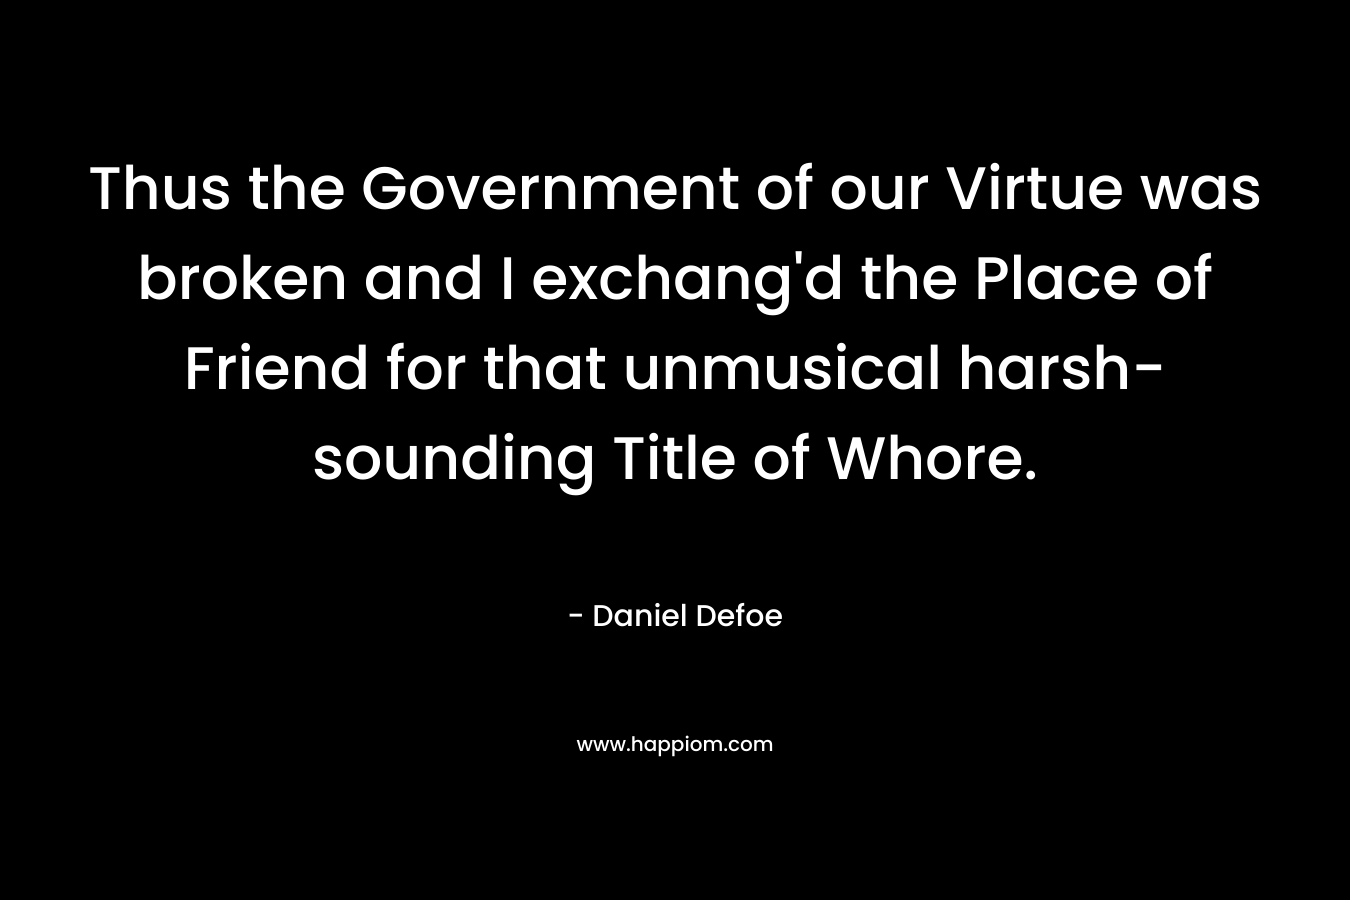 Thus the Government of our Virtue was broken and I exchang’d the Place of Friend for that unmusical harsh-sounding Title of Whore. – Daniel Defoe